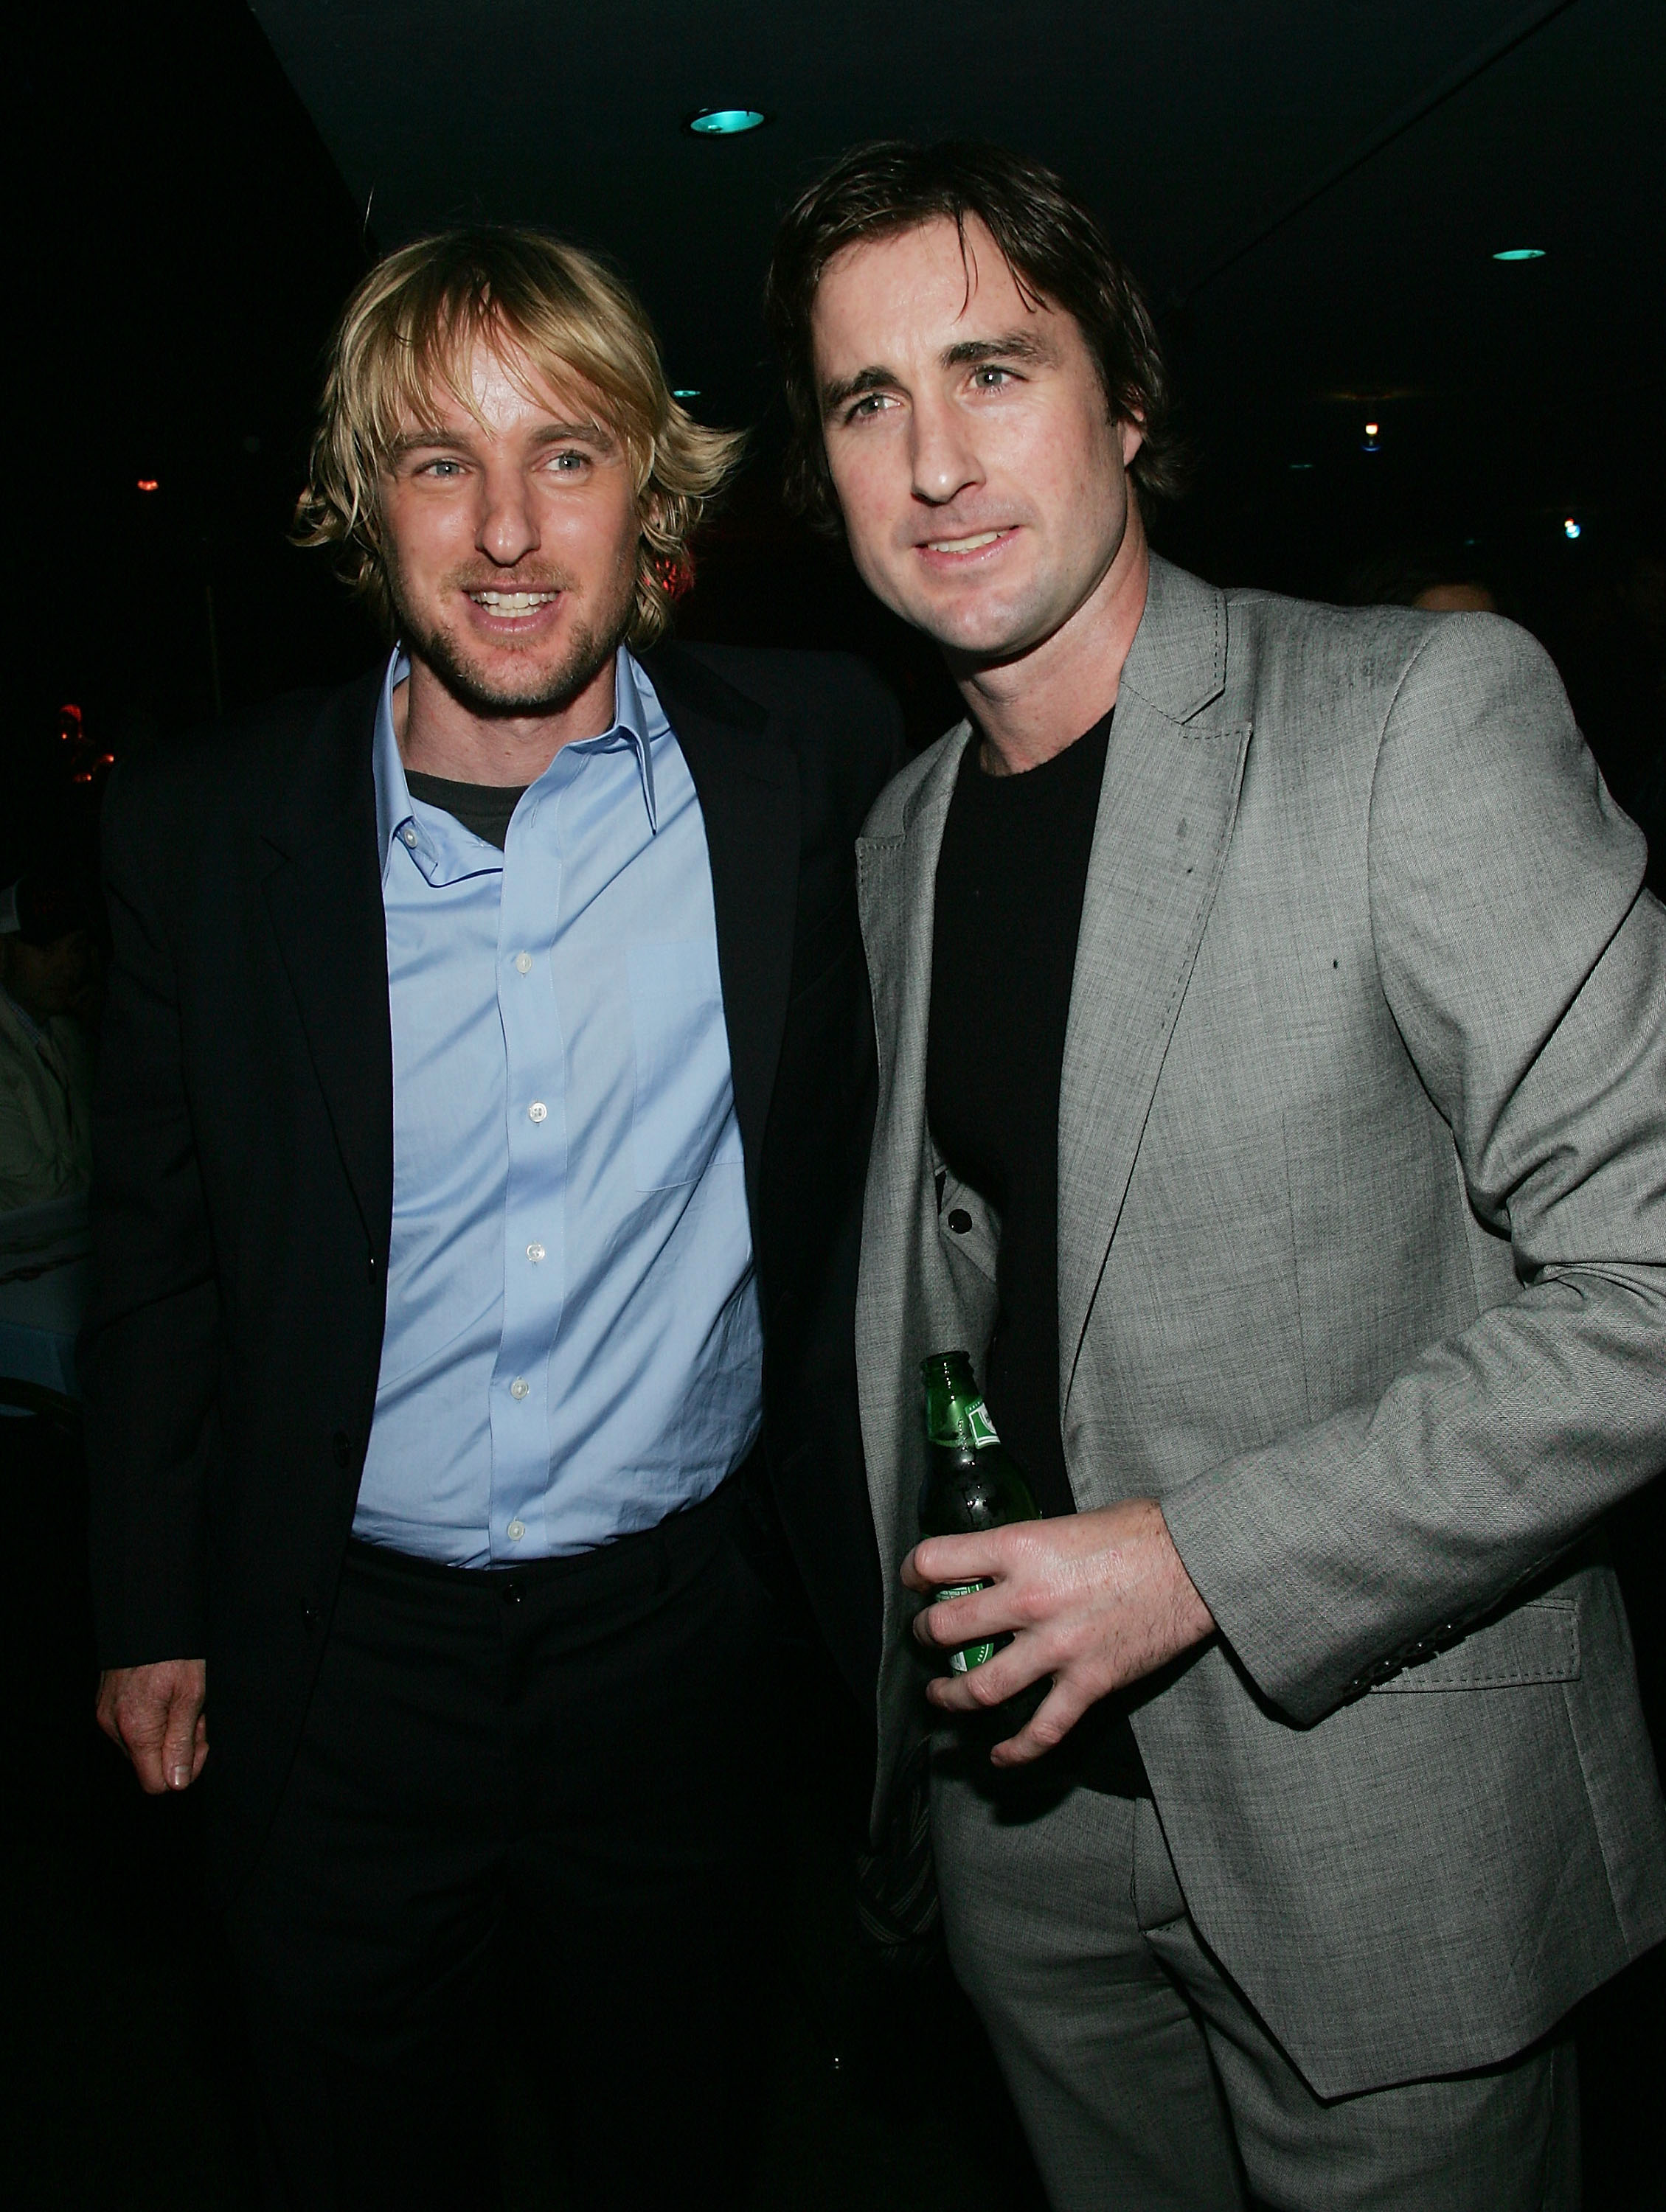 Owen and Luke Wilson attend "The Life Aquatic With Steve Zissou" premiere after party in New York City, on December 9, 2004. | Source: Getty Images